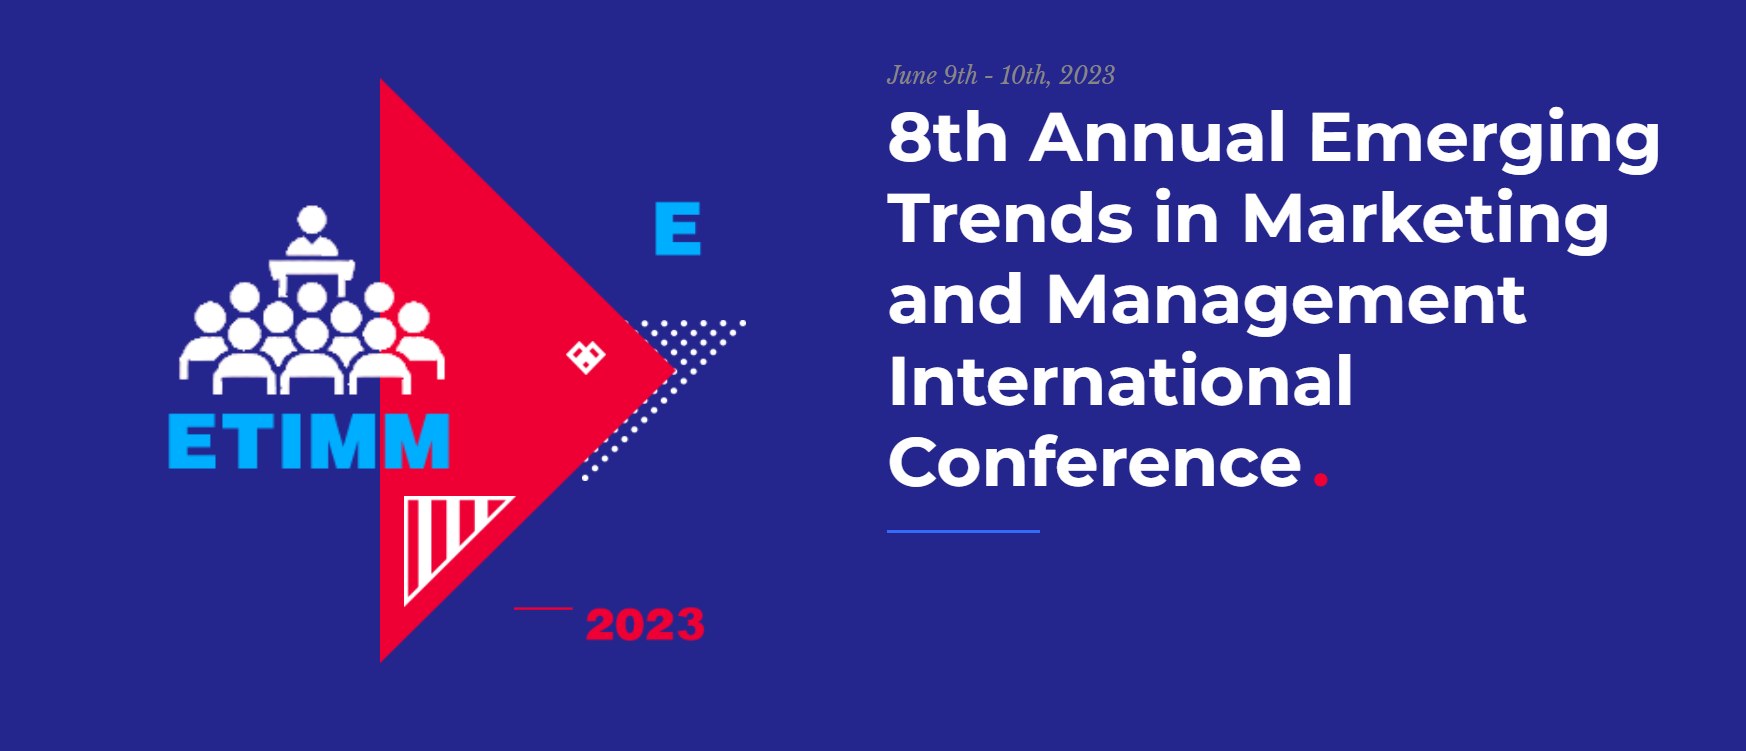 8th Annual Emerging Trends in Marketing and Management International Conference